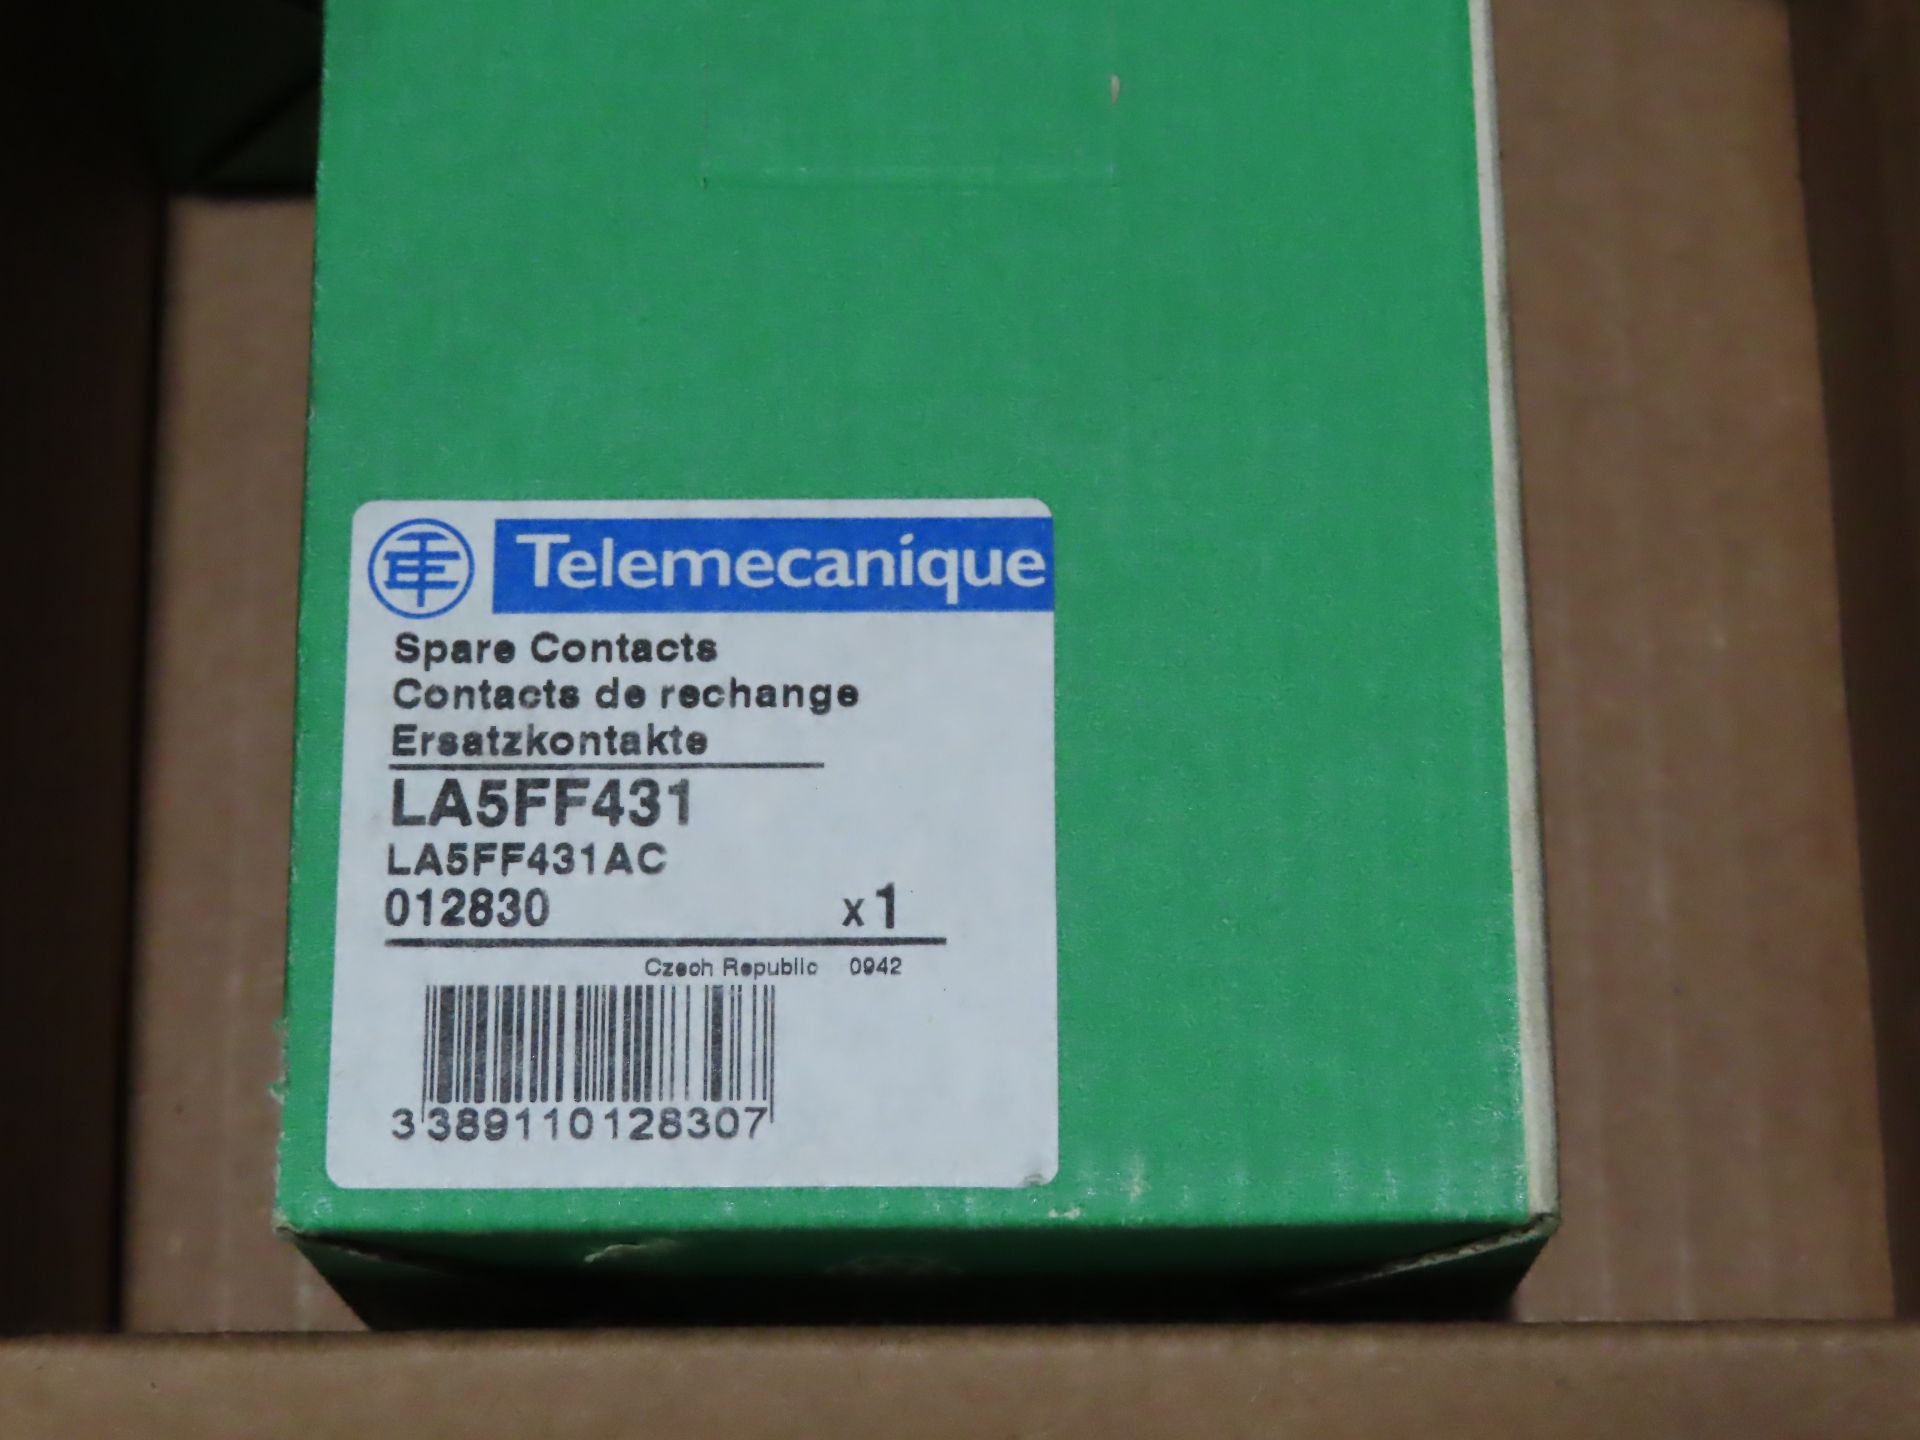 Qty 3 Telemecanique Model LA5FF431 spare contacts, new in boxes, as always with Brolyn LLC auctions, - Image 2 of 2